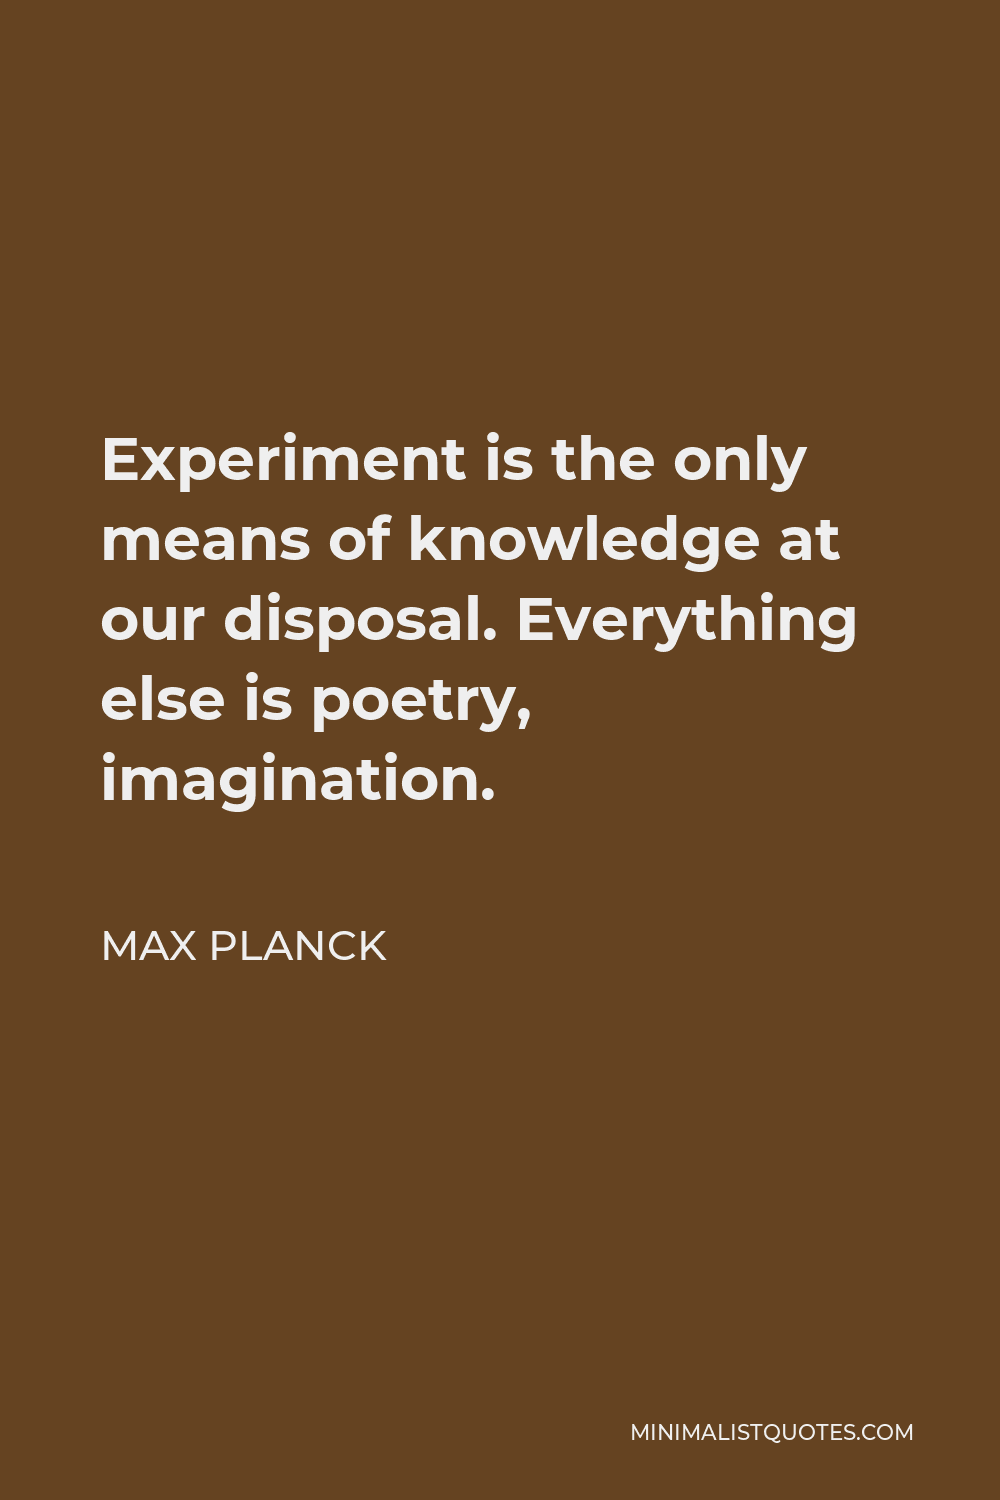 Max Planck Quote - Experiment is the only means of knowledge at our disposal. Everything else is poetry, imagination.